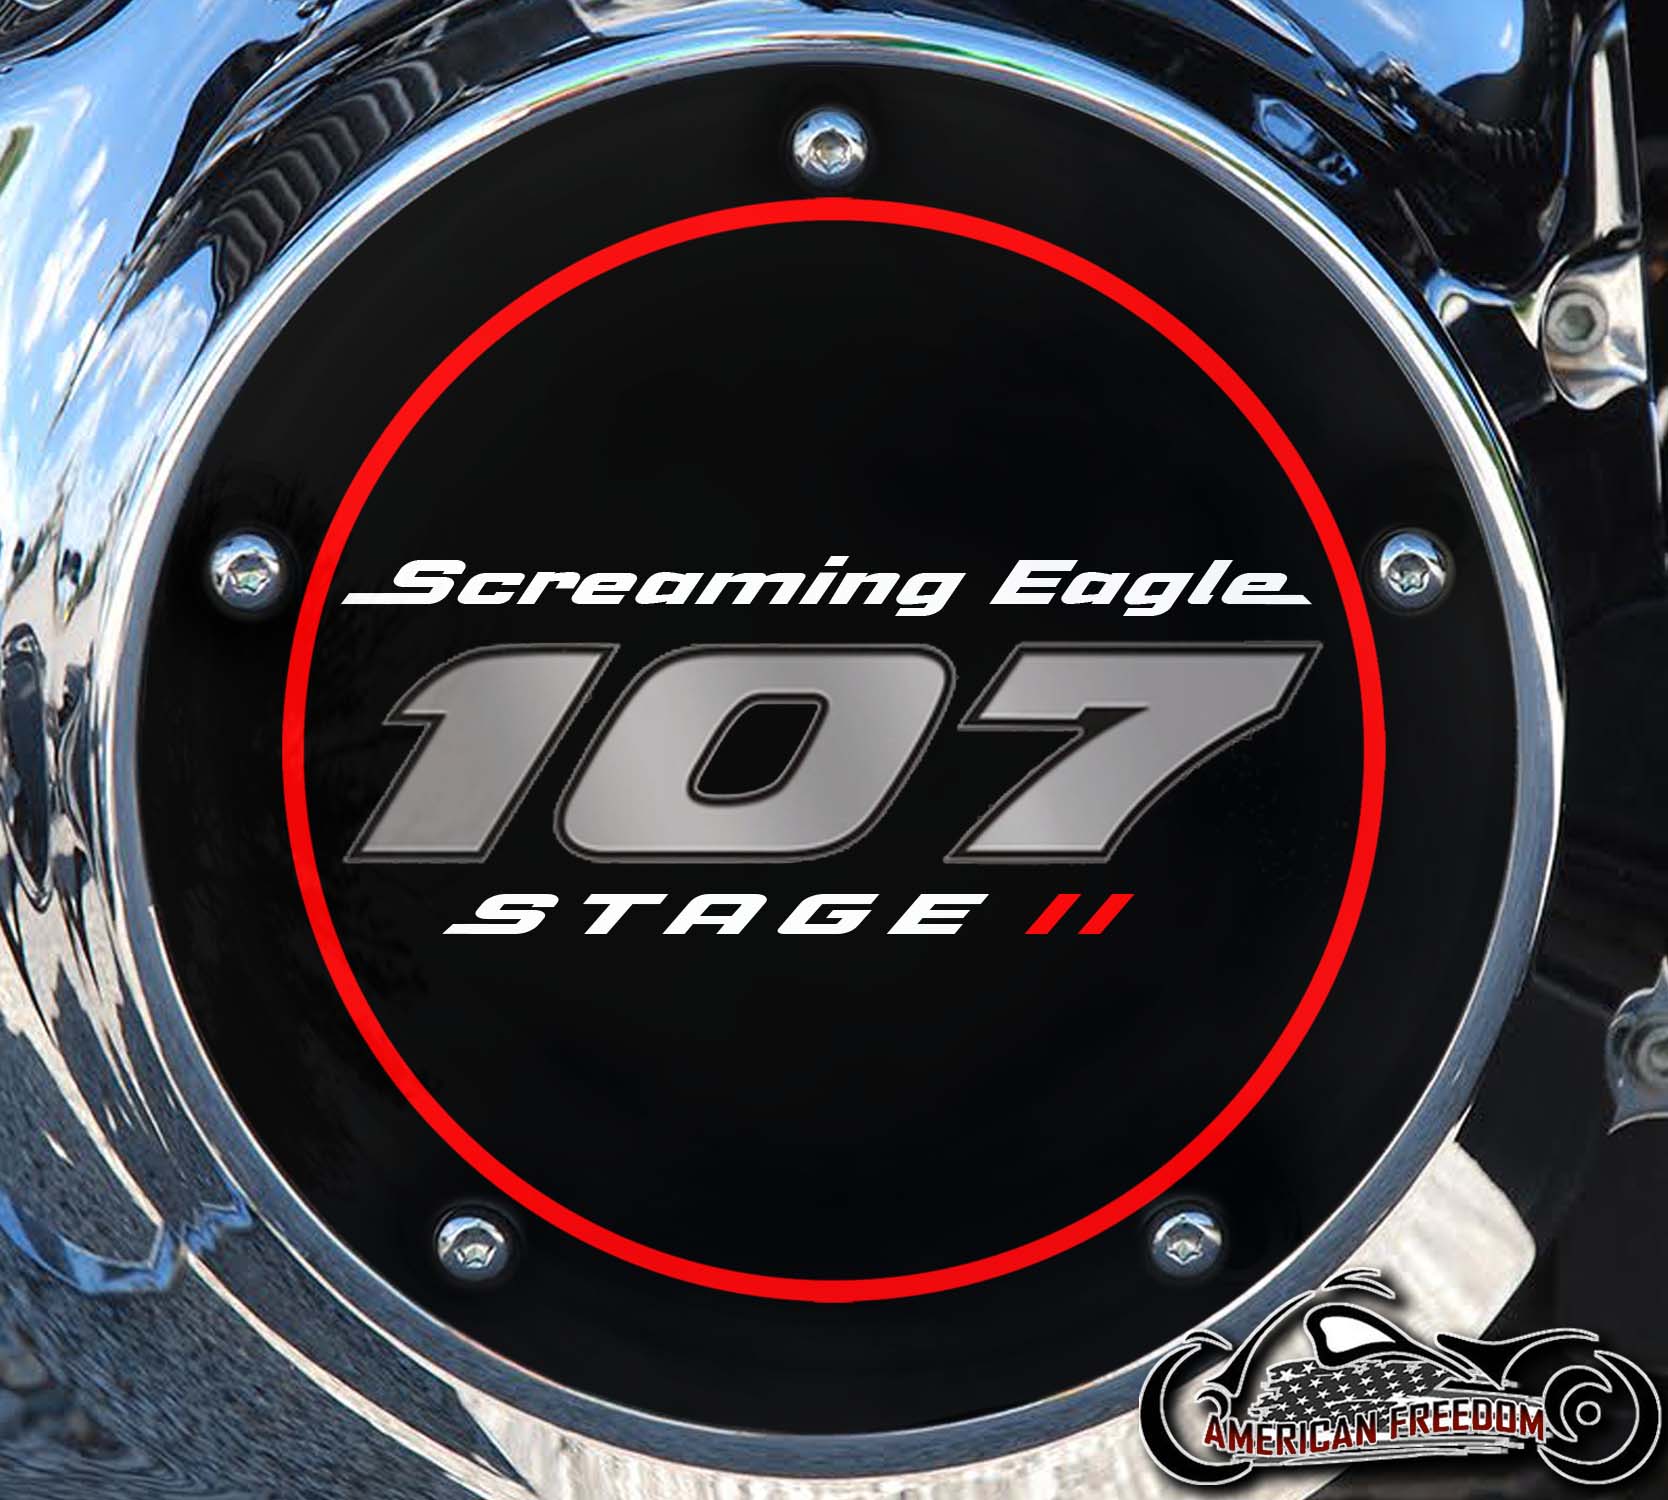 Screaming Eagle Stage II 107 Derby cover OL